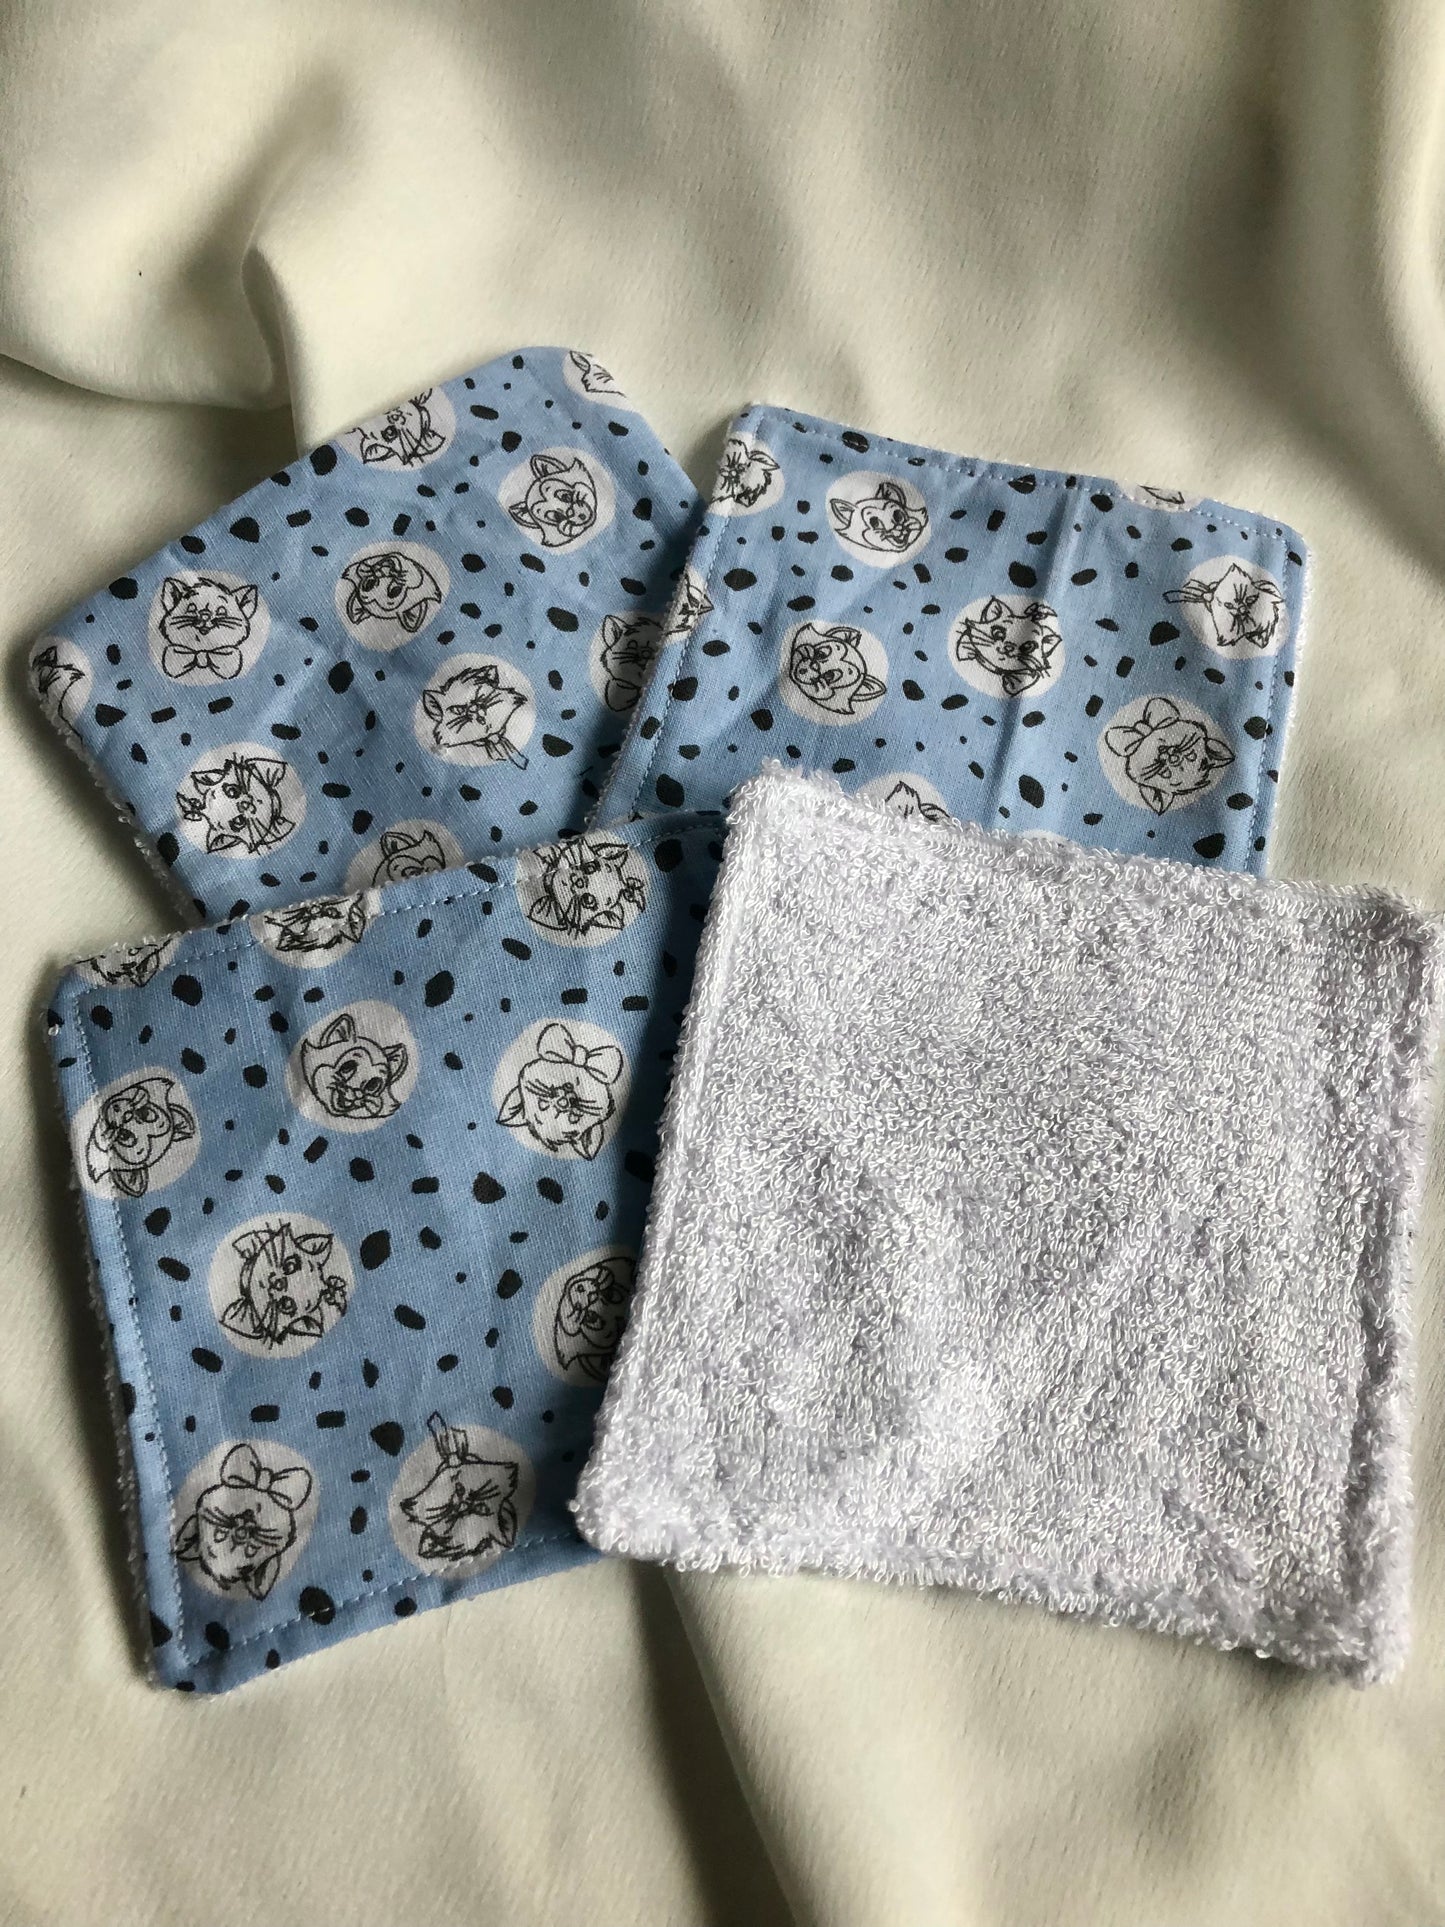 Cats on Blue - Reusable Wipes